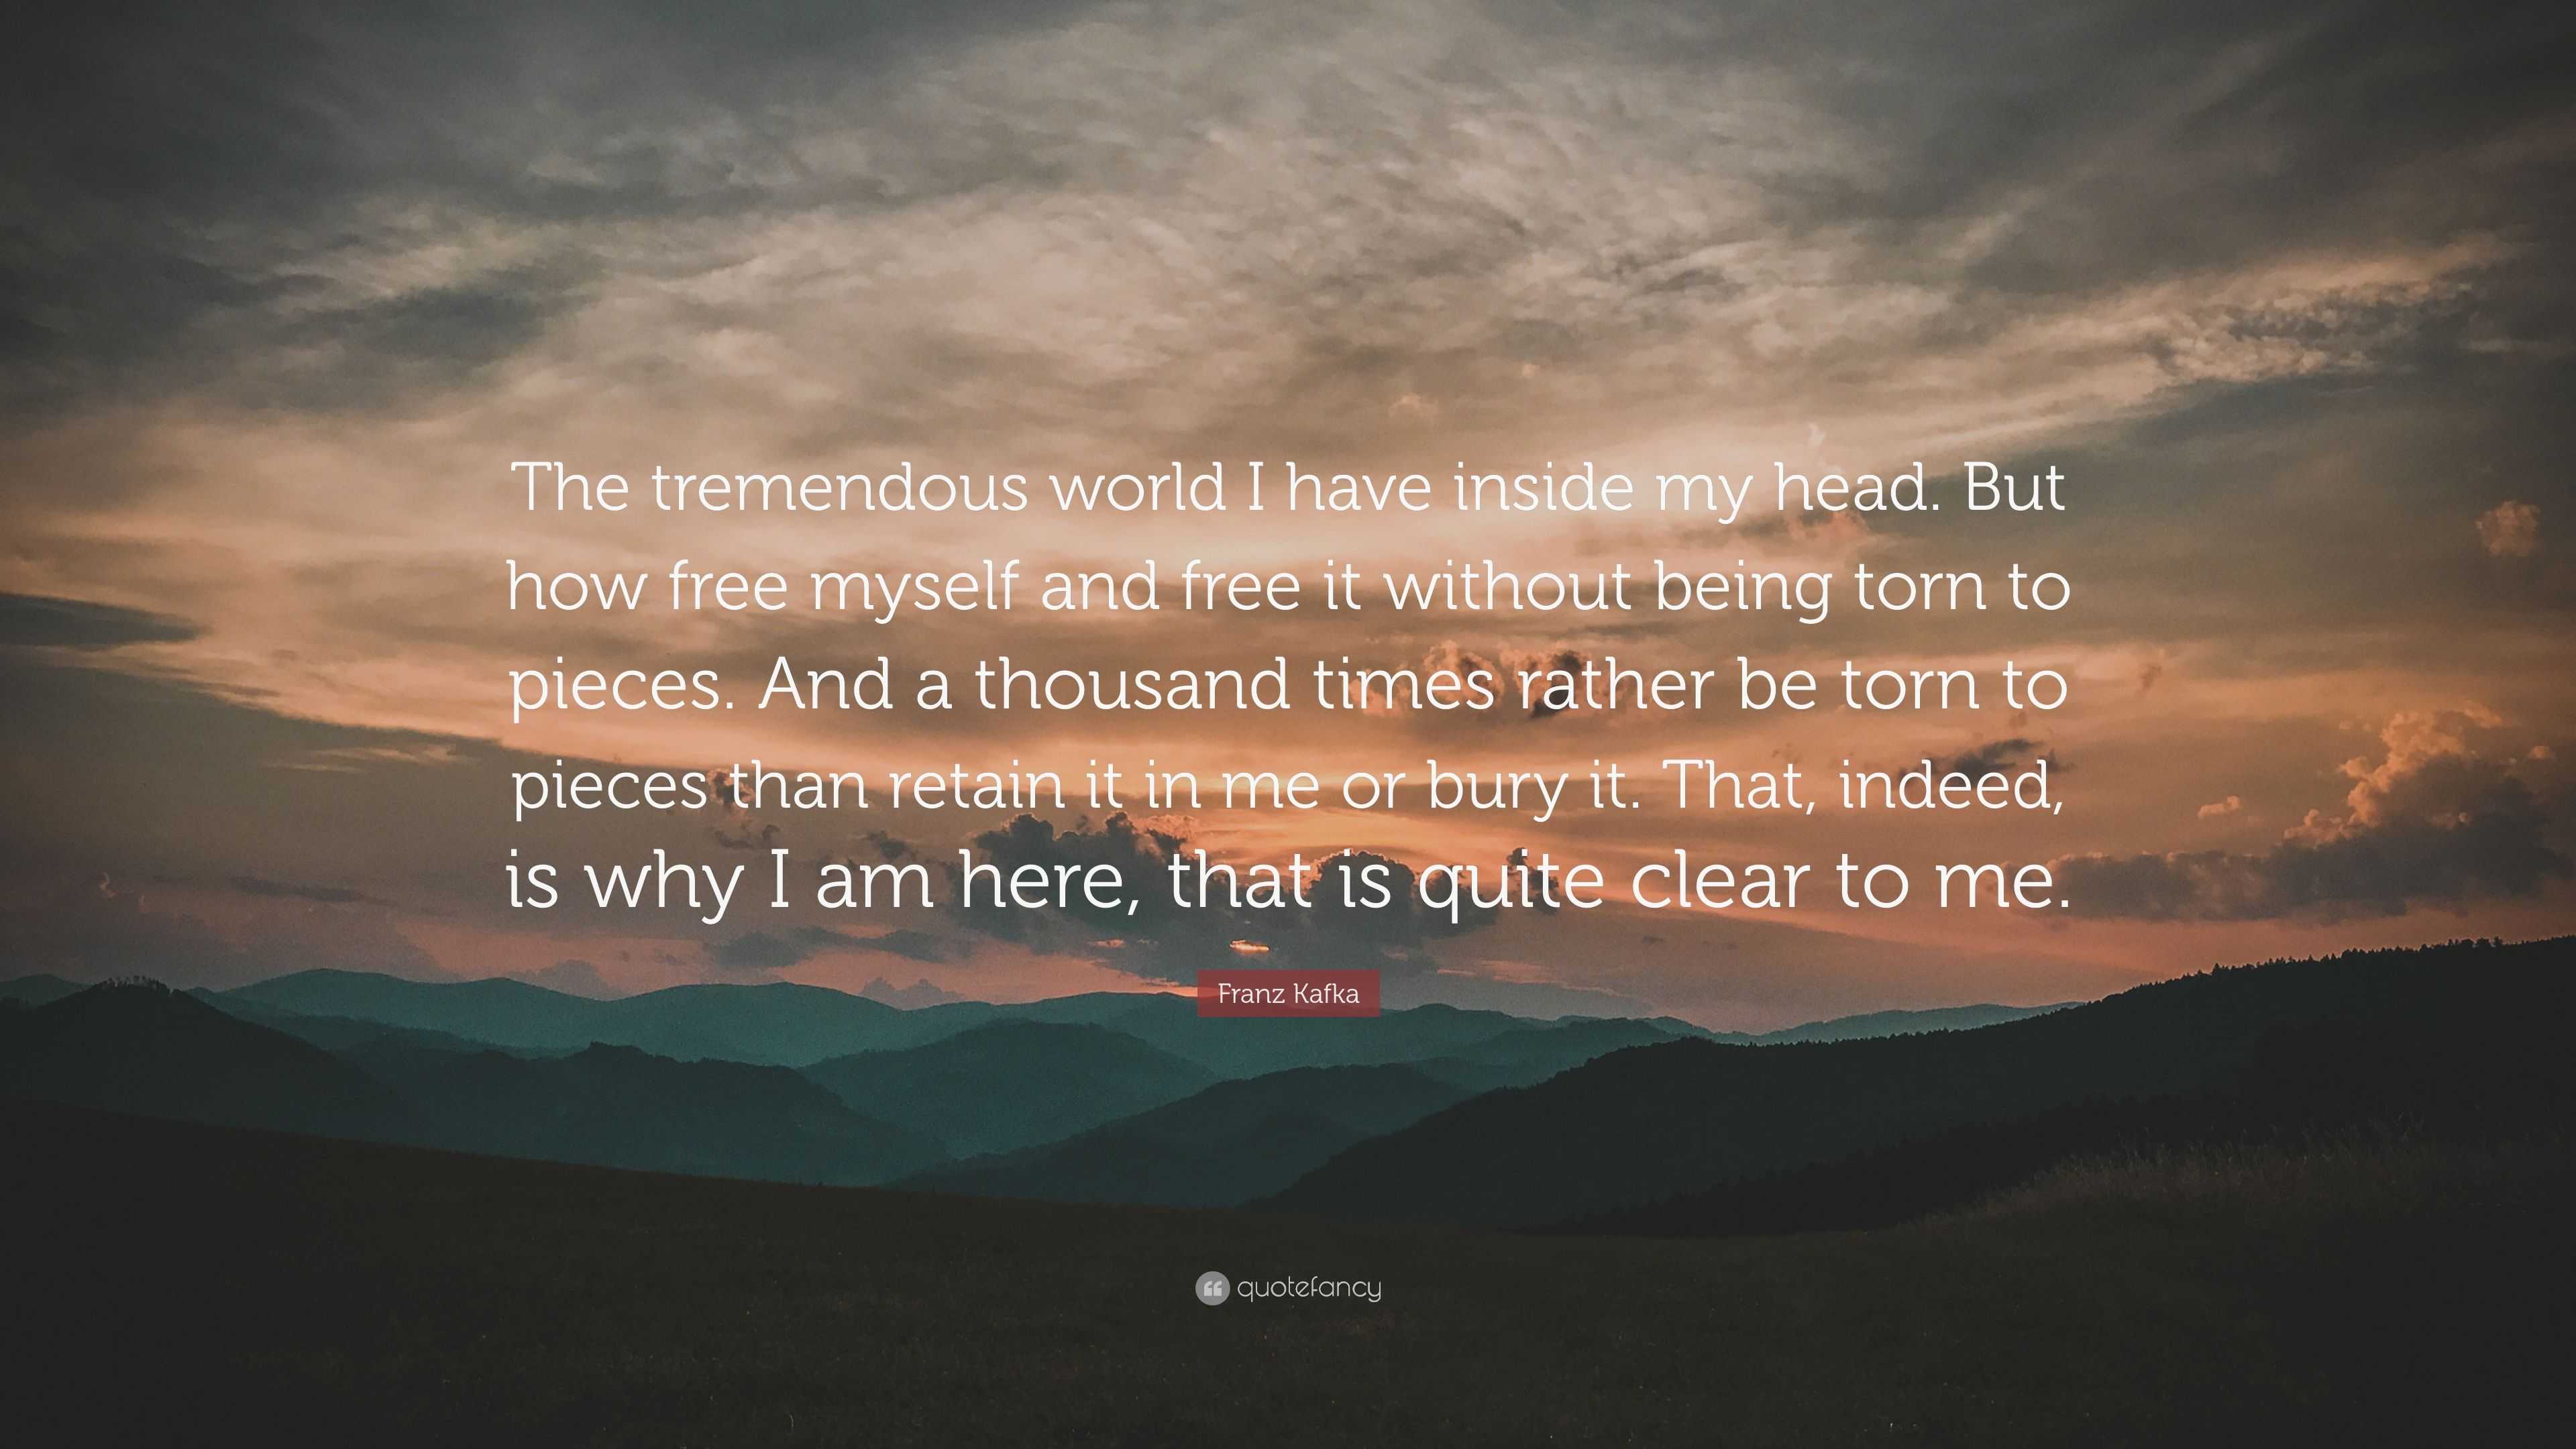 Franz Kafka Quote: “The tremendous world I have inside my head. But how ...